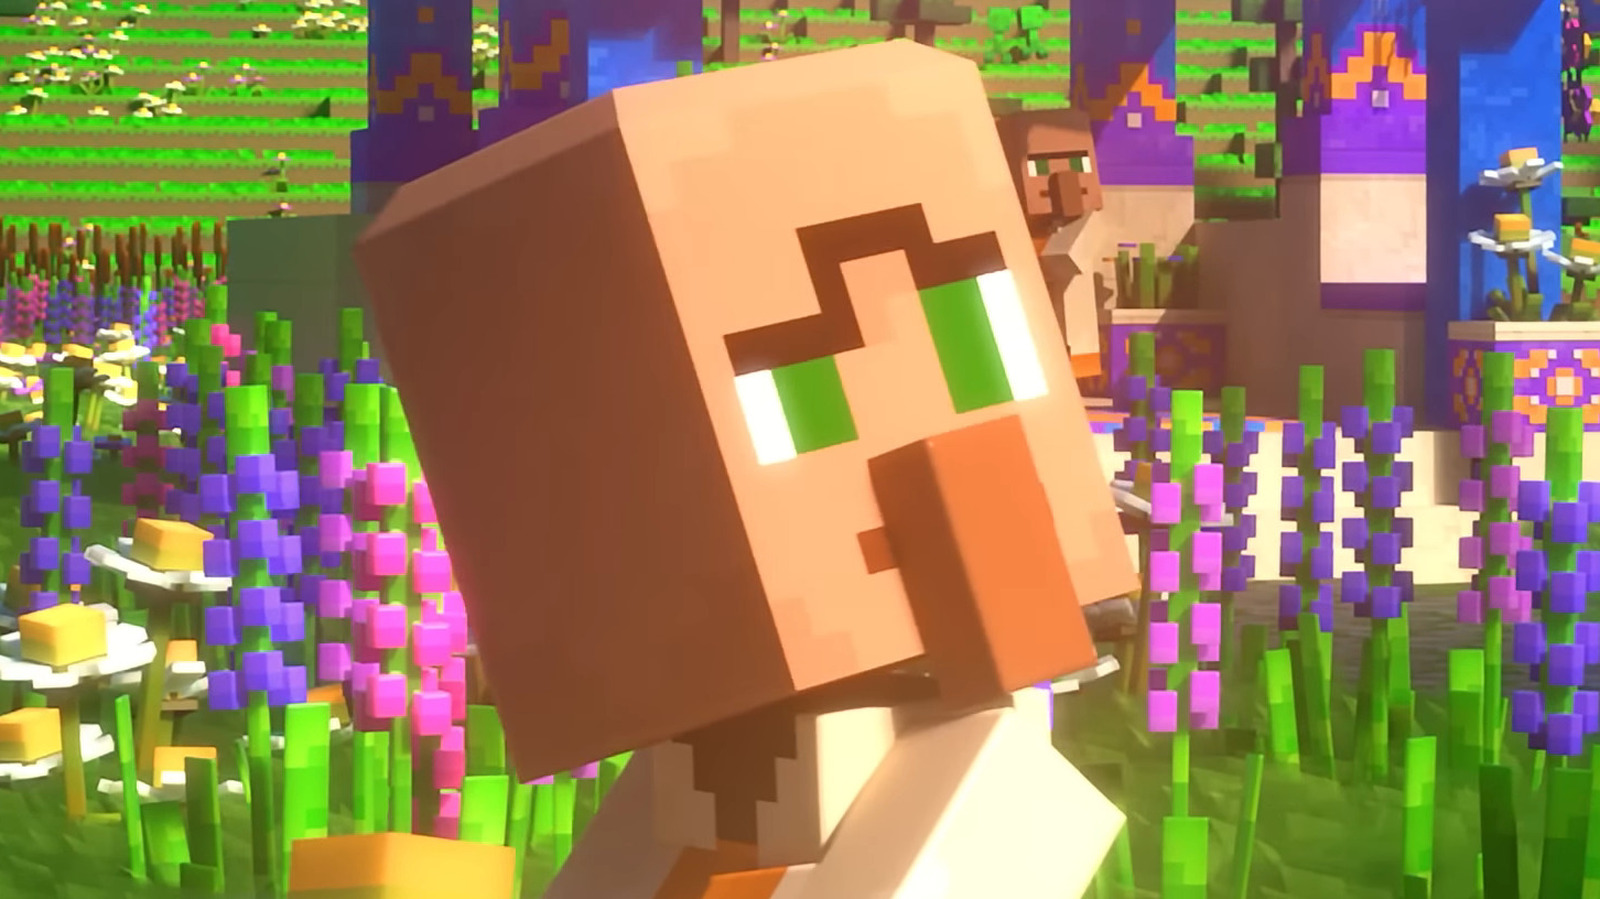 Minecraft Legends' Release Date, Trailer, Gameplay, Genre, and Story